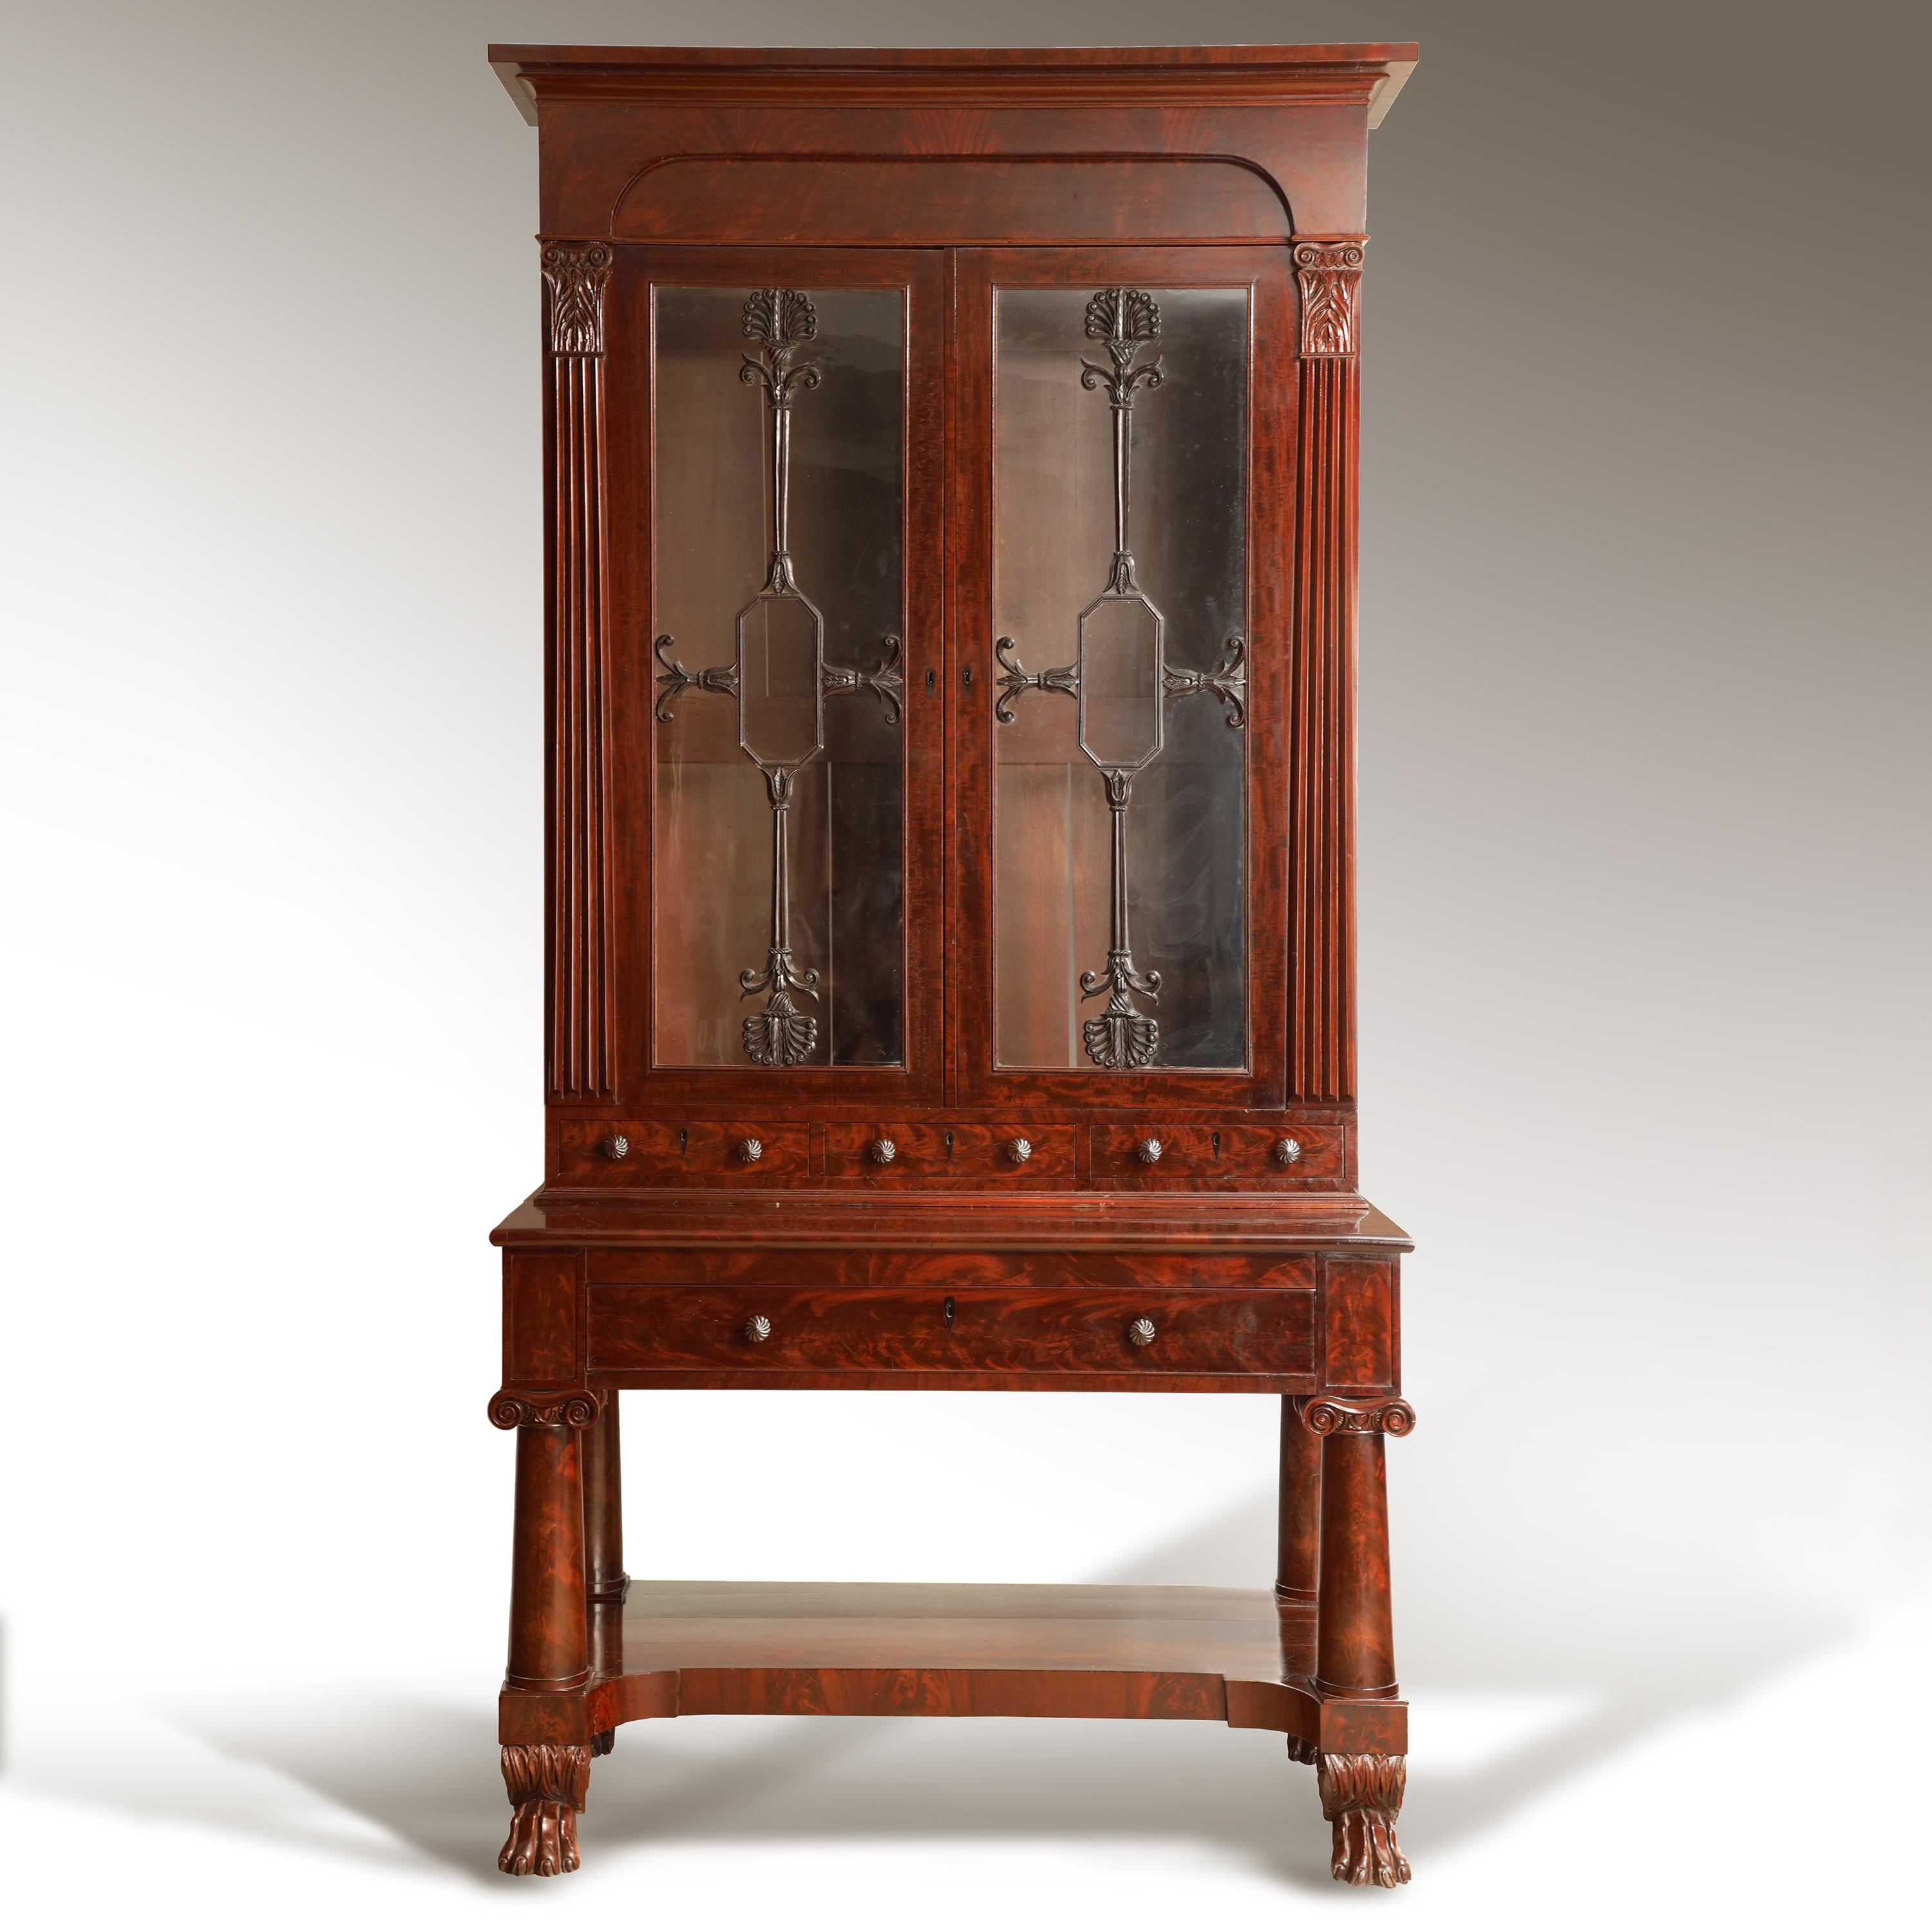 American Exceptional Mahogany Bureau Bookcase from Baltimore Maryland, circa 1830 For Sale